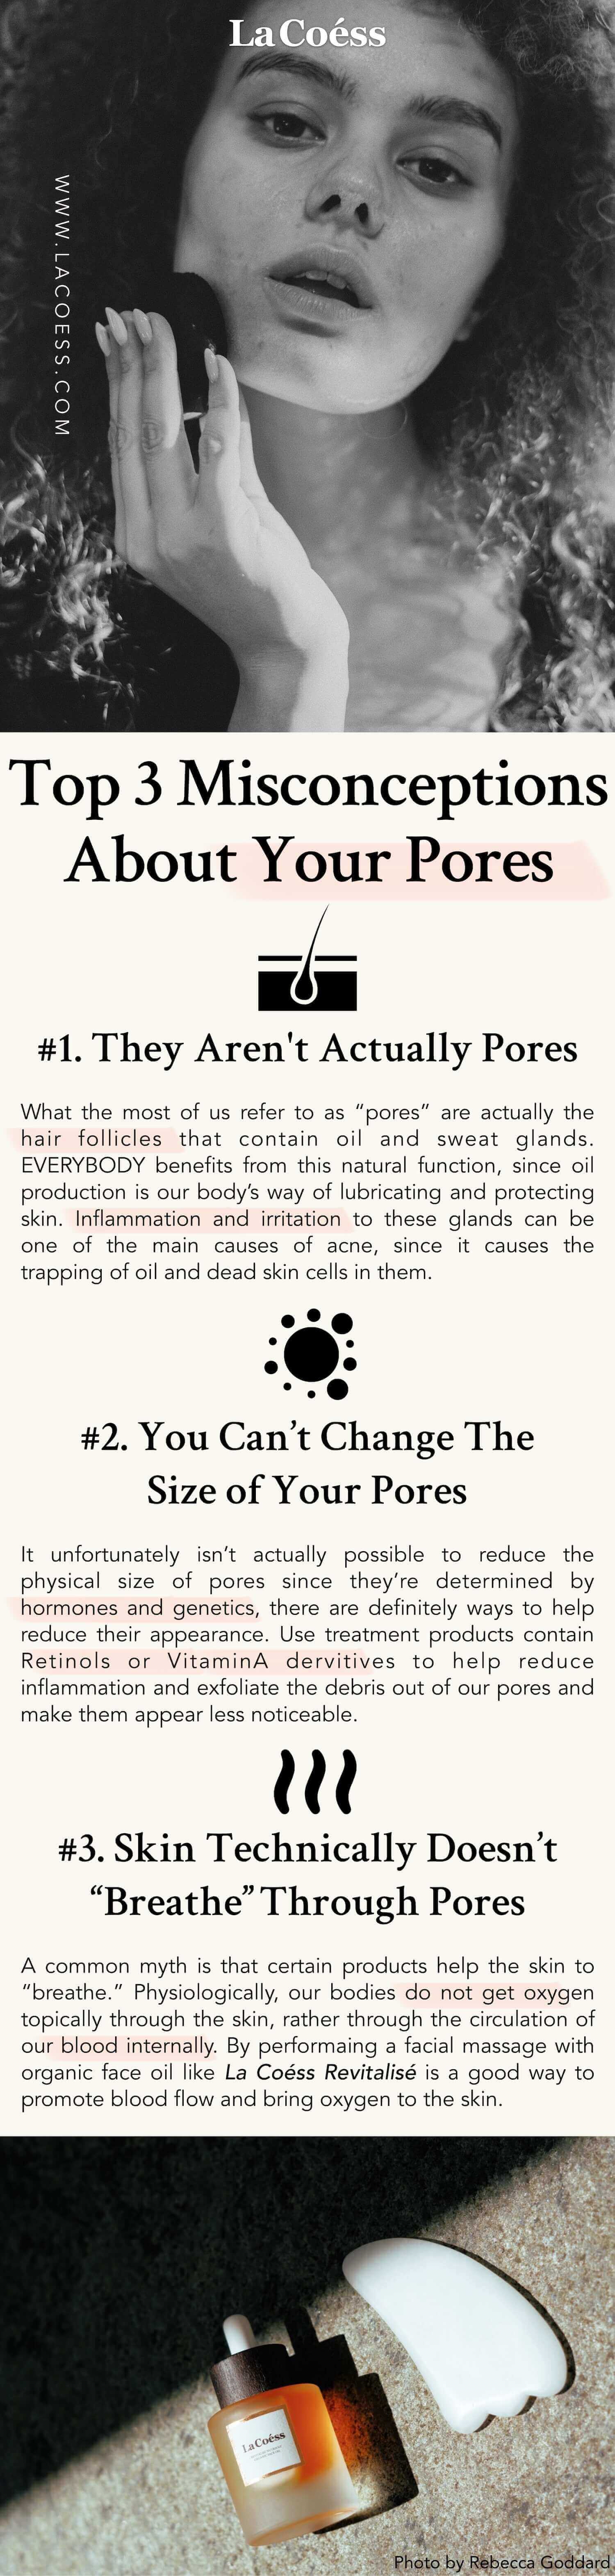 Top 3 Misconceptions About Your Pores